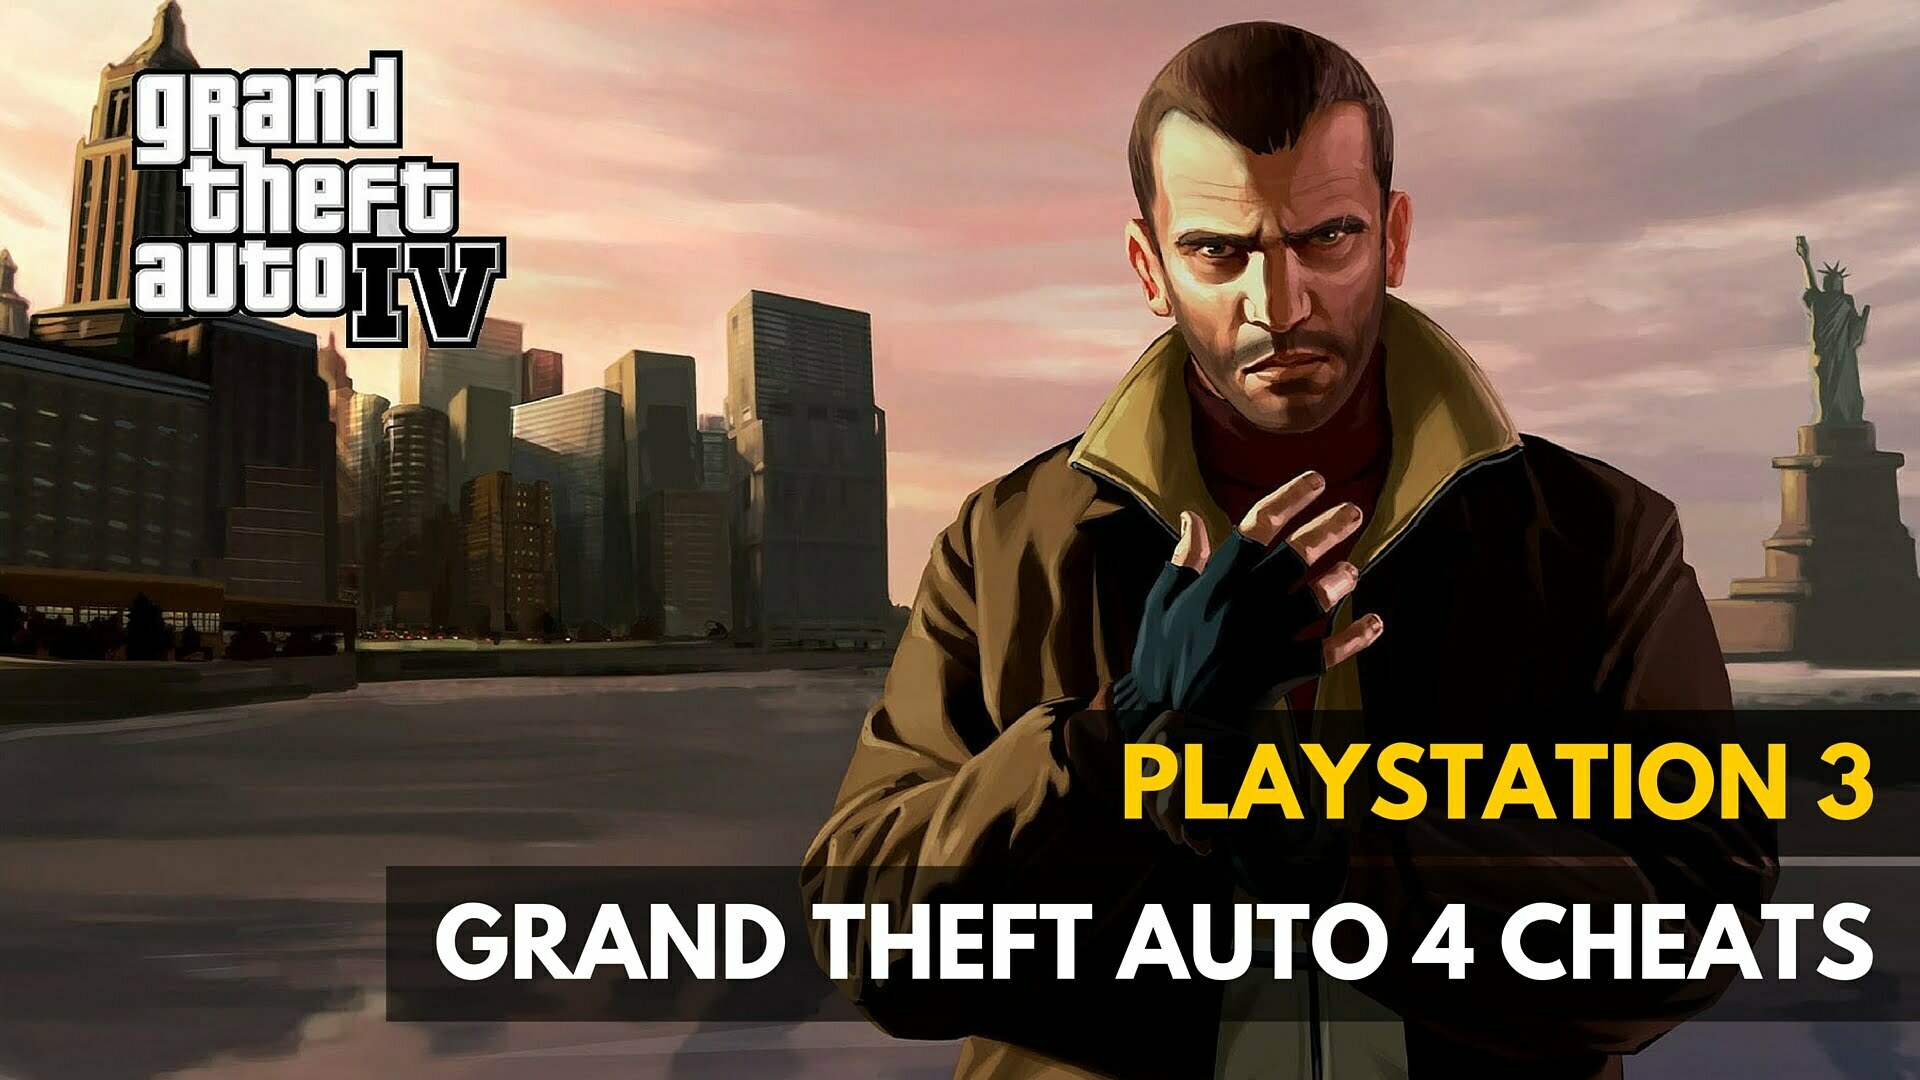 Grand Theft 4 Cheats For Playstation 3 - Gadget Review